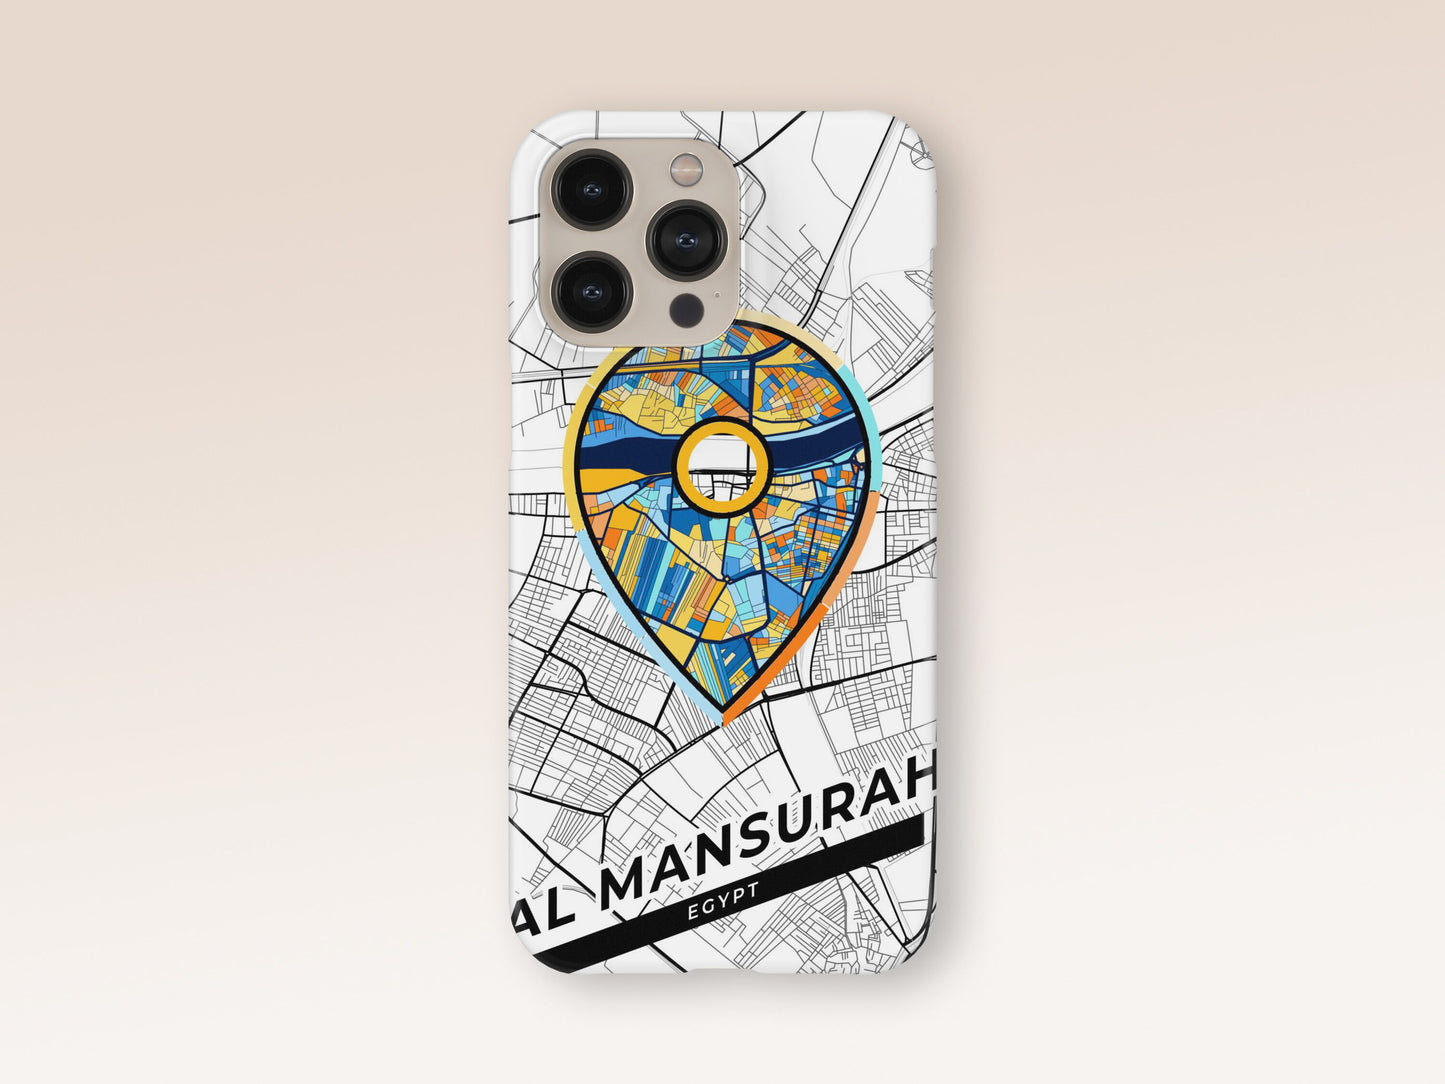 Al Mansurah Egypt slim phone case with colorful icon. Birthday, wedding or housewarming gift. Couple match cases. 1